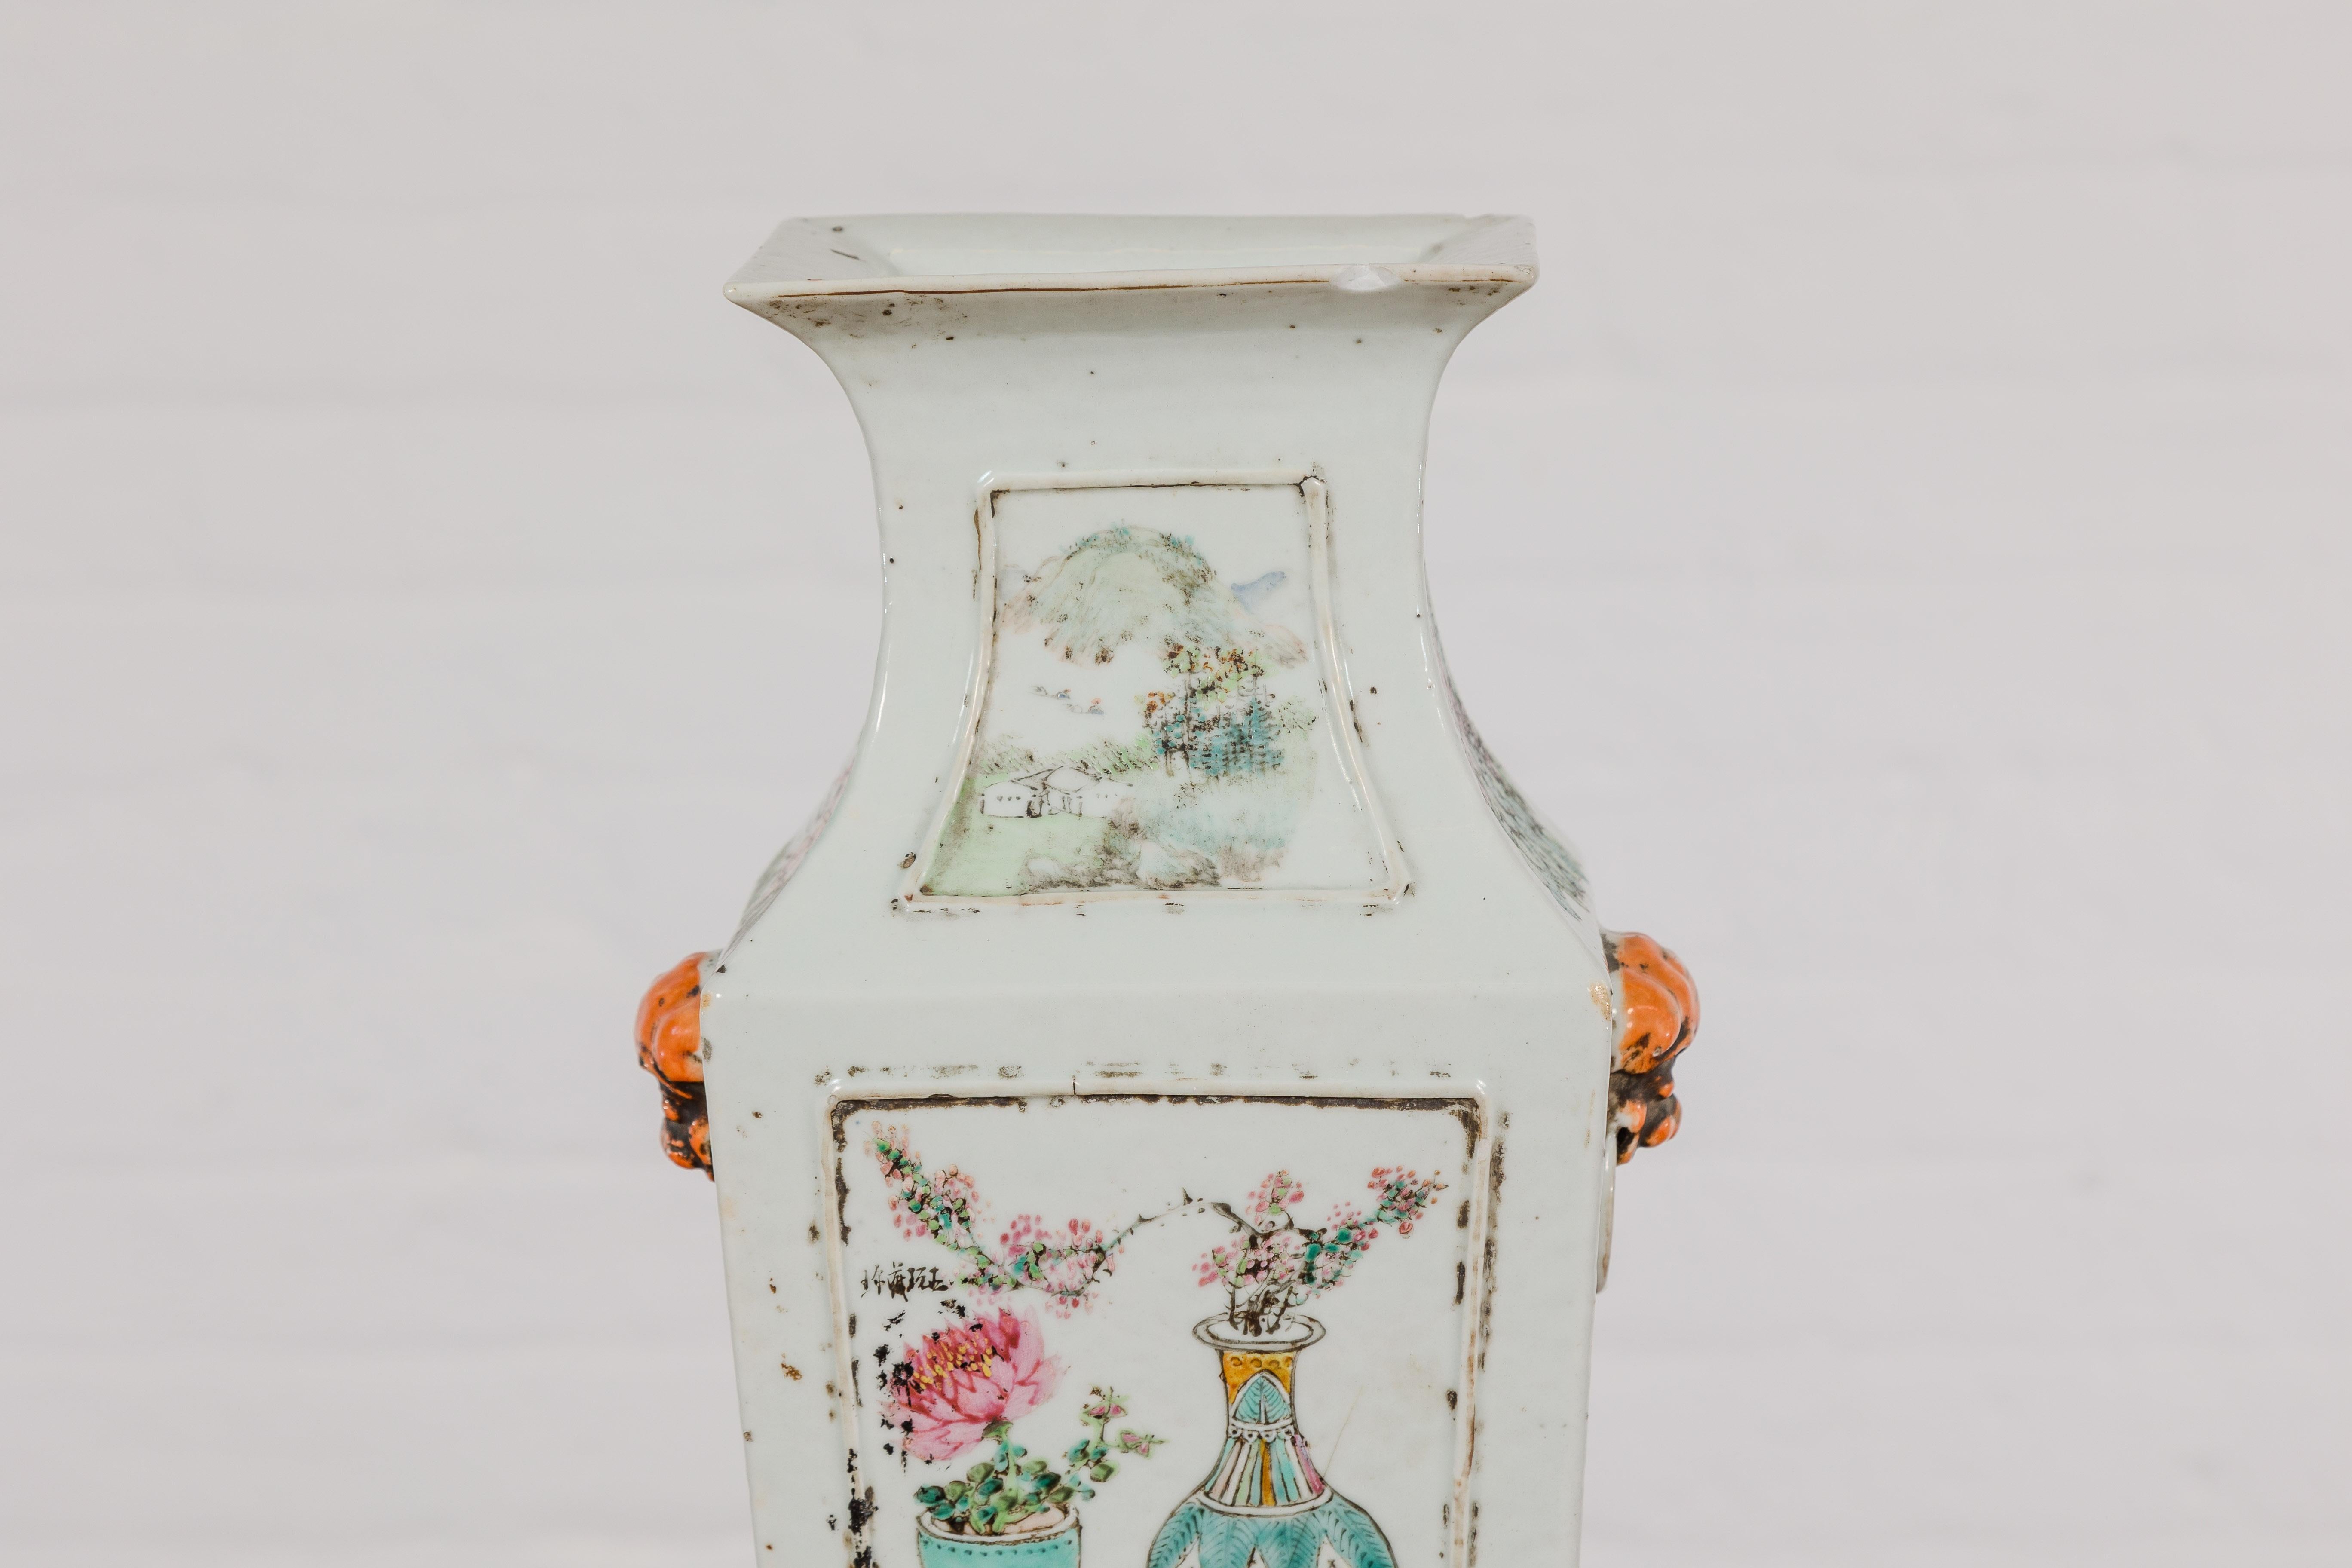 Chinese Qing Dynasty White Porcelain Vase with Painted Flowers, Objects and Calligraphy For Sale